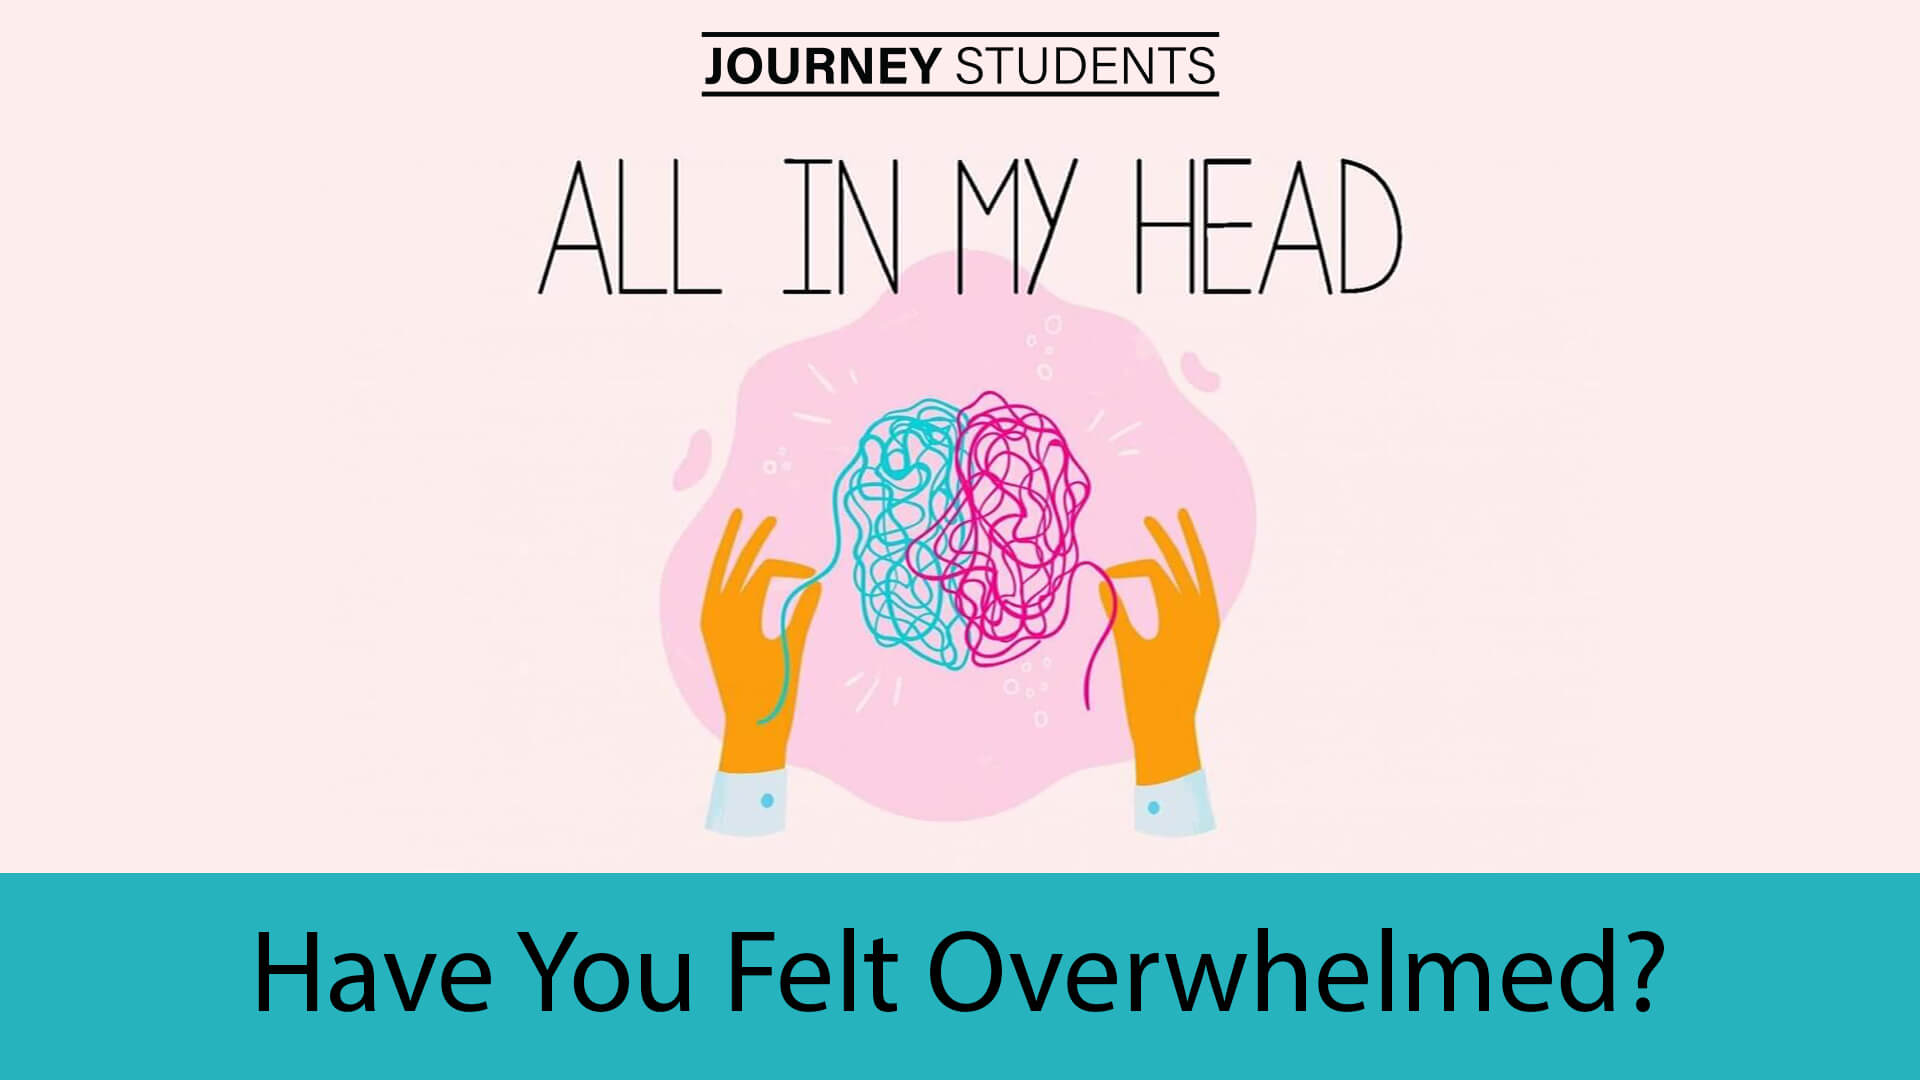 Have You Felt Overwhelmed - All in My Head - Journey Students